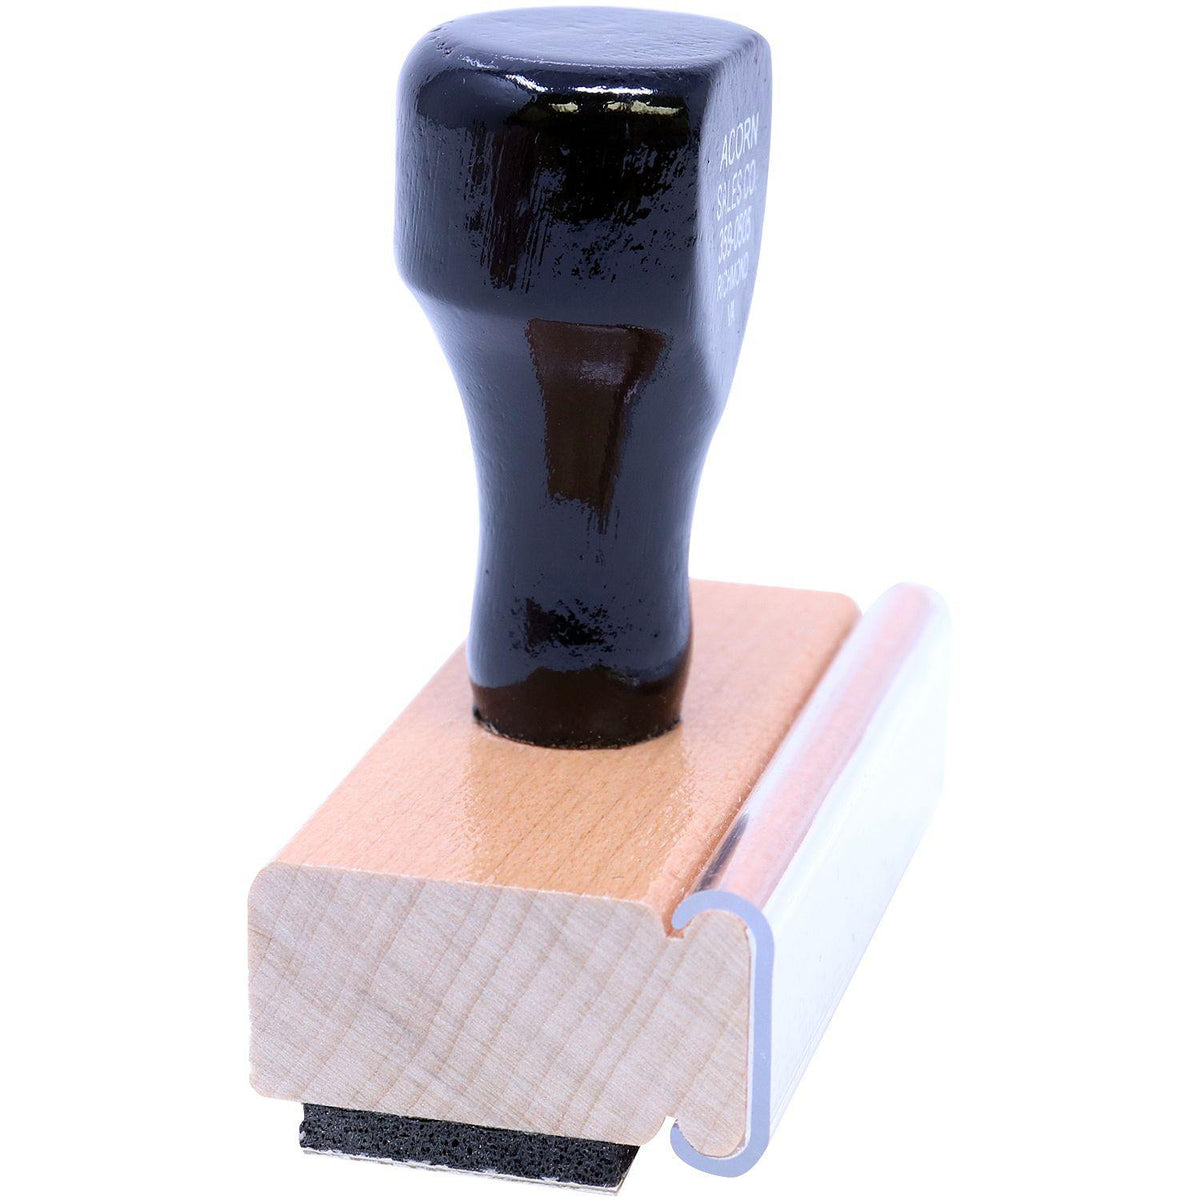 Side View of Distributed Rubber Stamp at an Angle